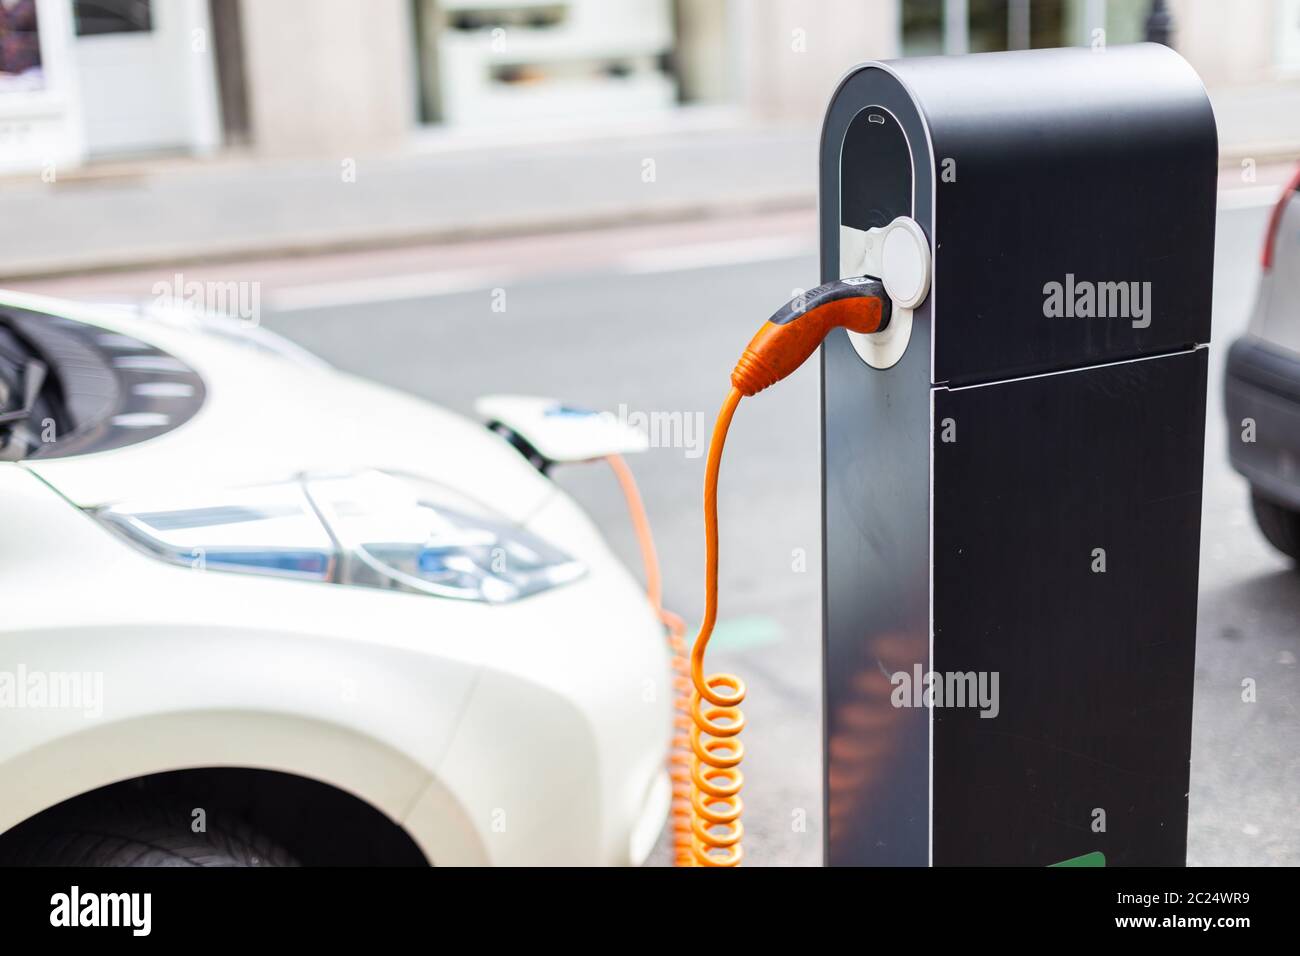 Power supply for electric car charging. Electric car charging station. Close up of the power supply plugged into an electric car being charged. Stock Photo